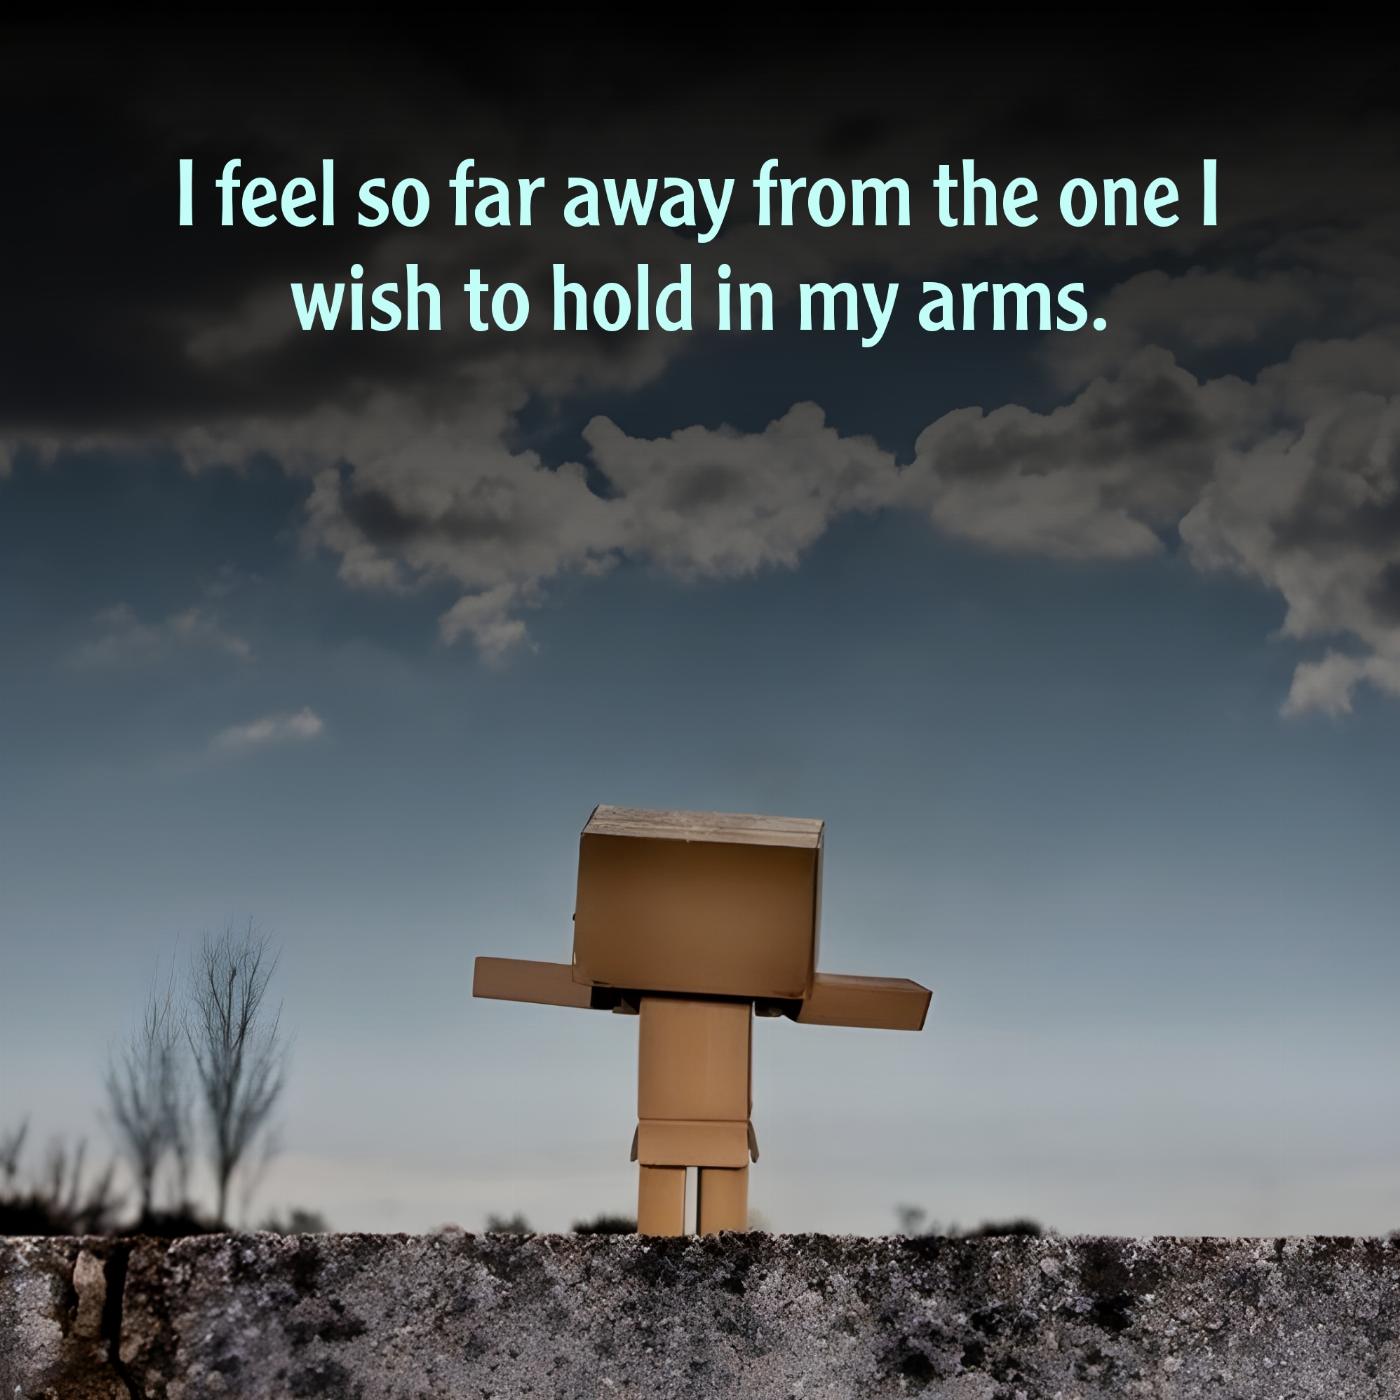 I feel so far away from the one I wish to hold in my arms